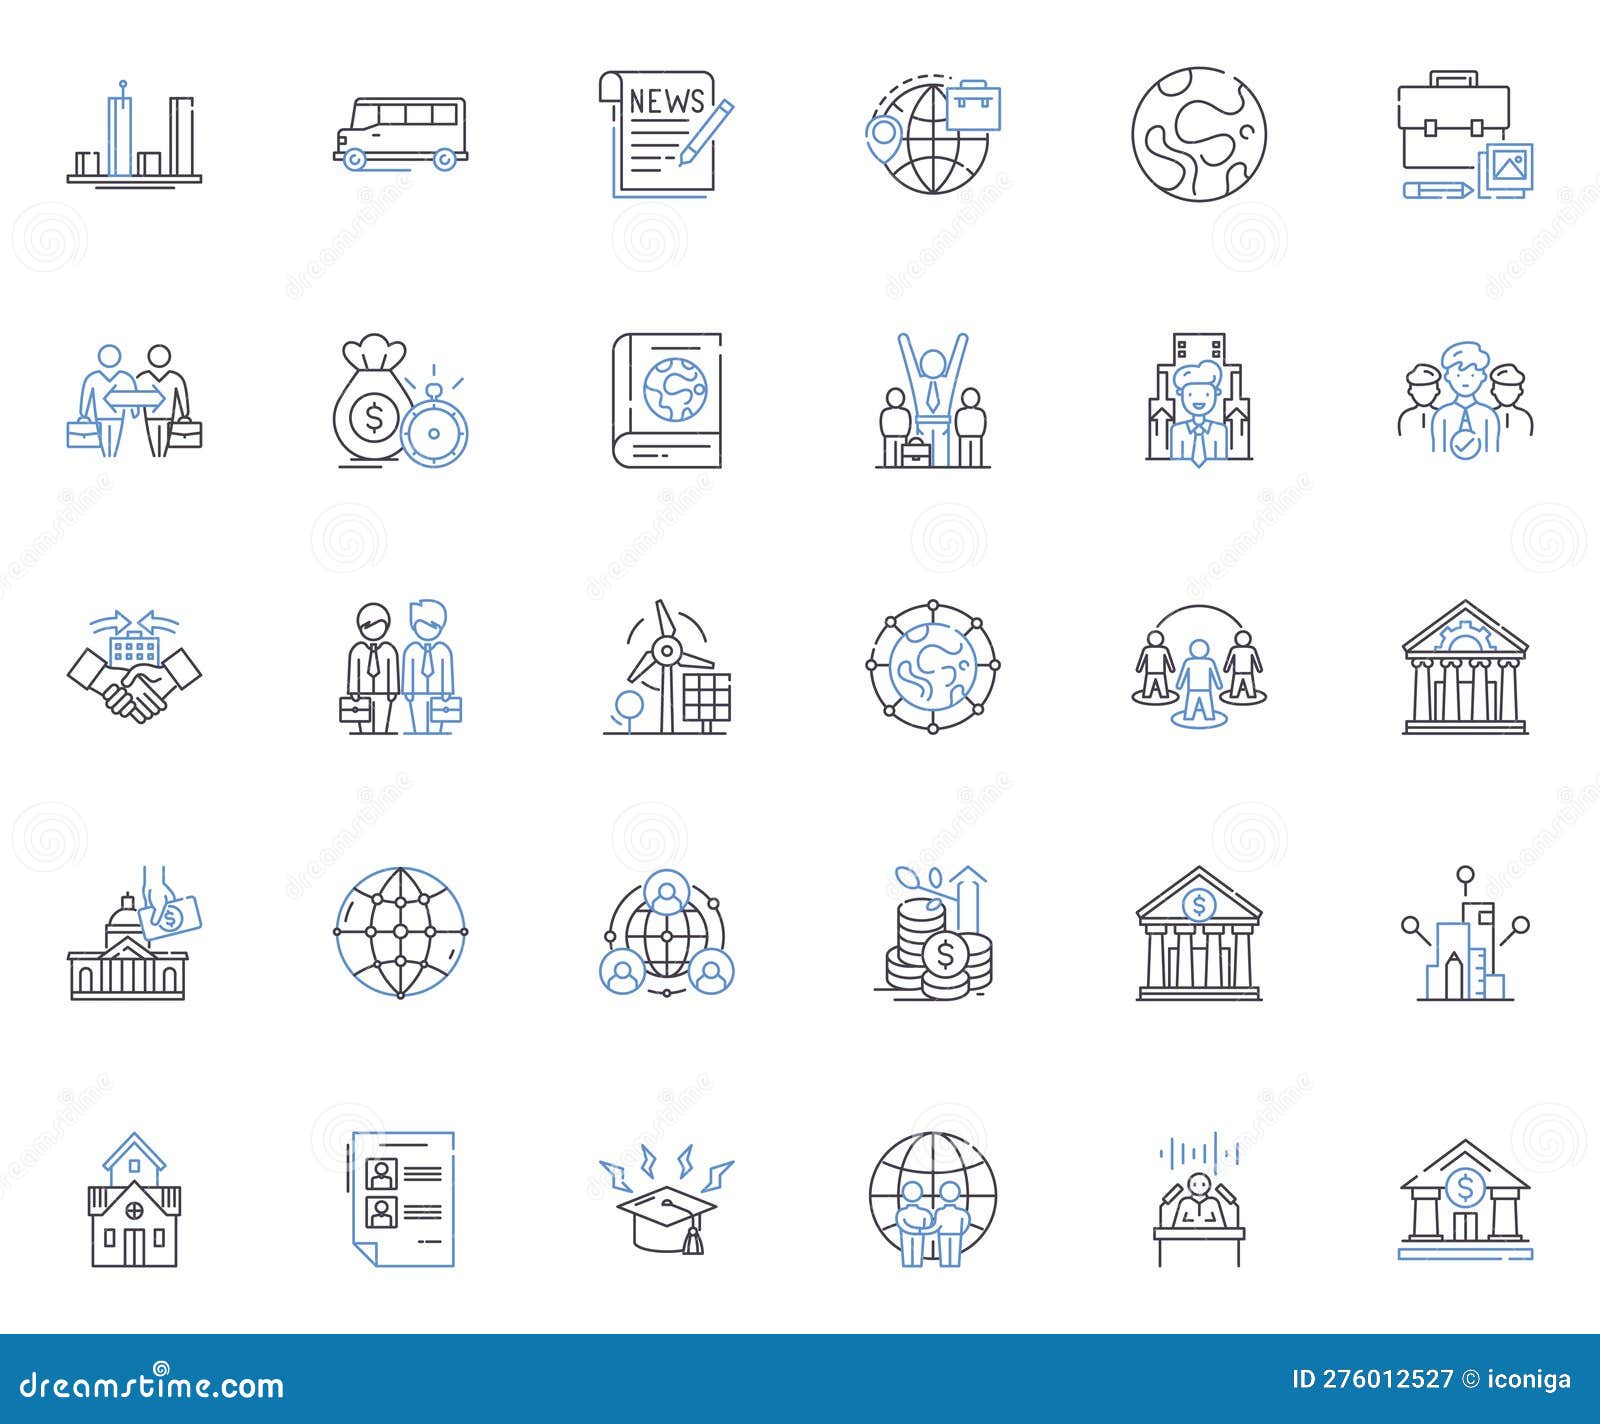 state regime line icons collection. dictatorship, oligarchy, autocracy, totalitarianism, authoritarianism, junta